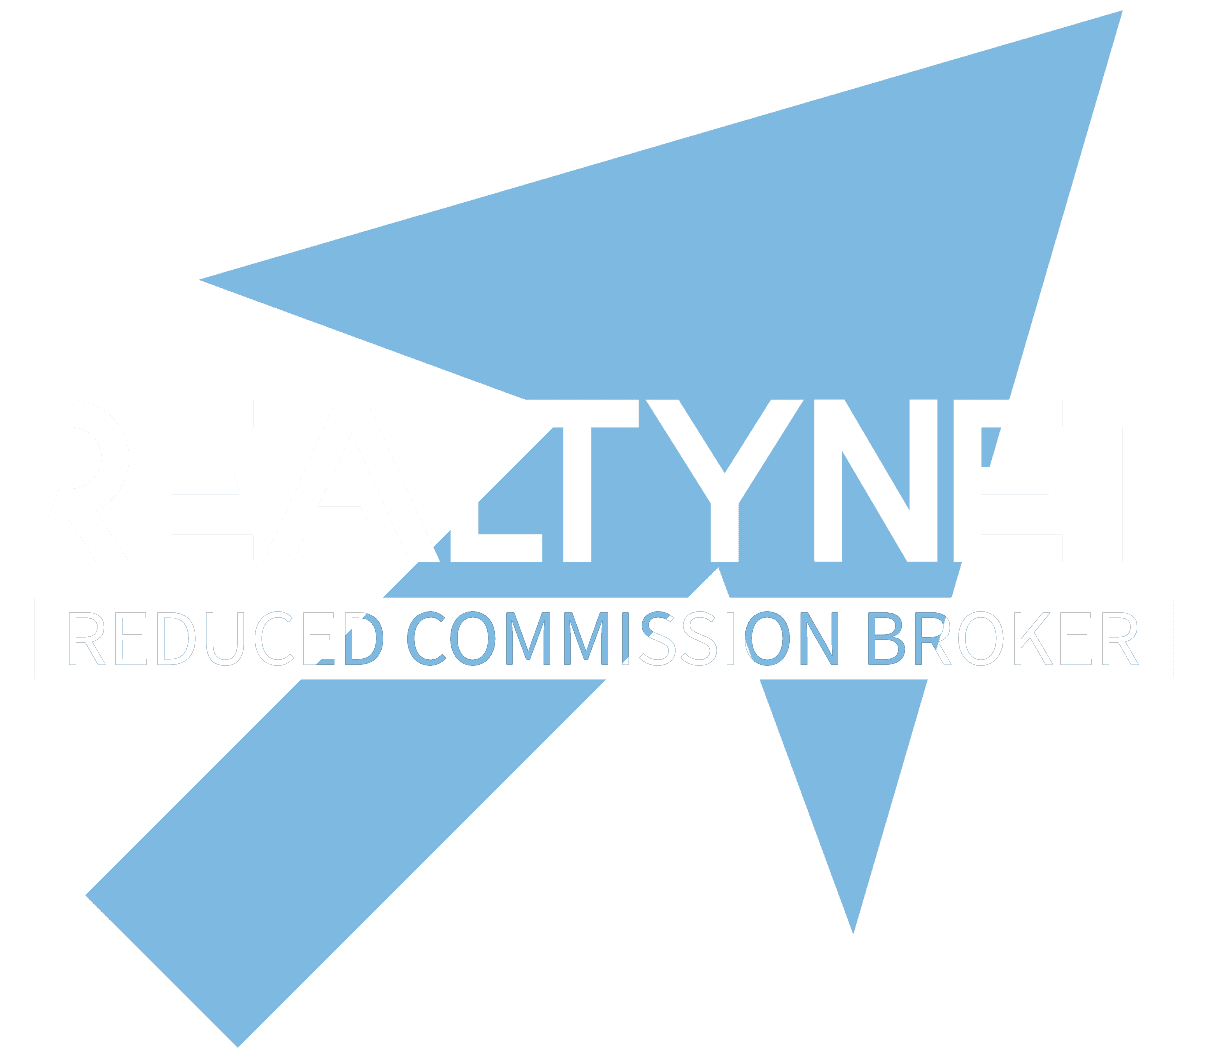 Realty Net Reduced Commission Broker